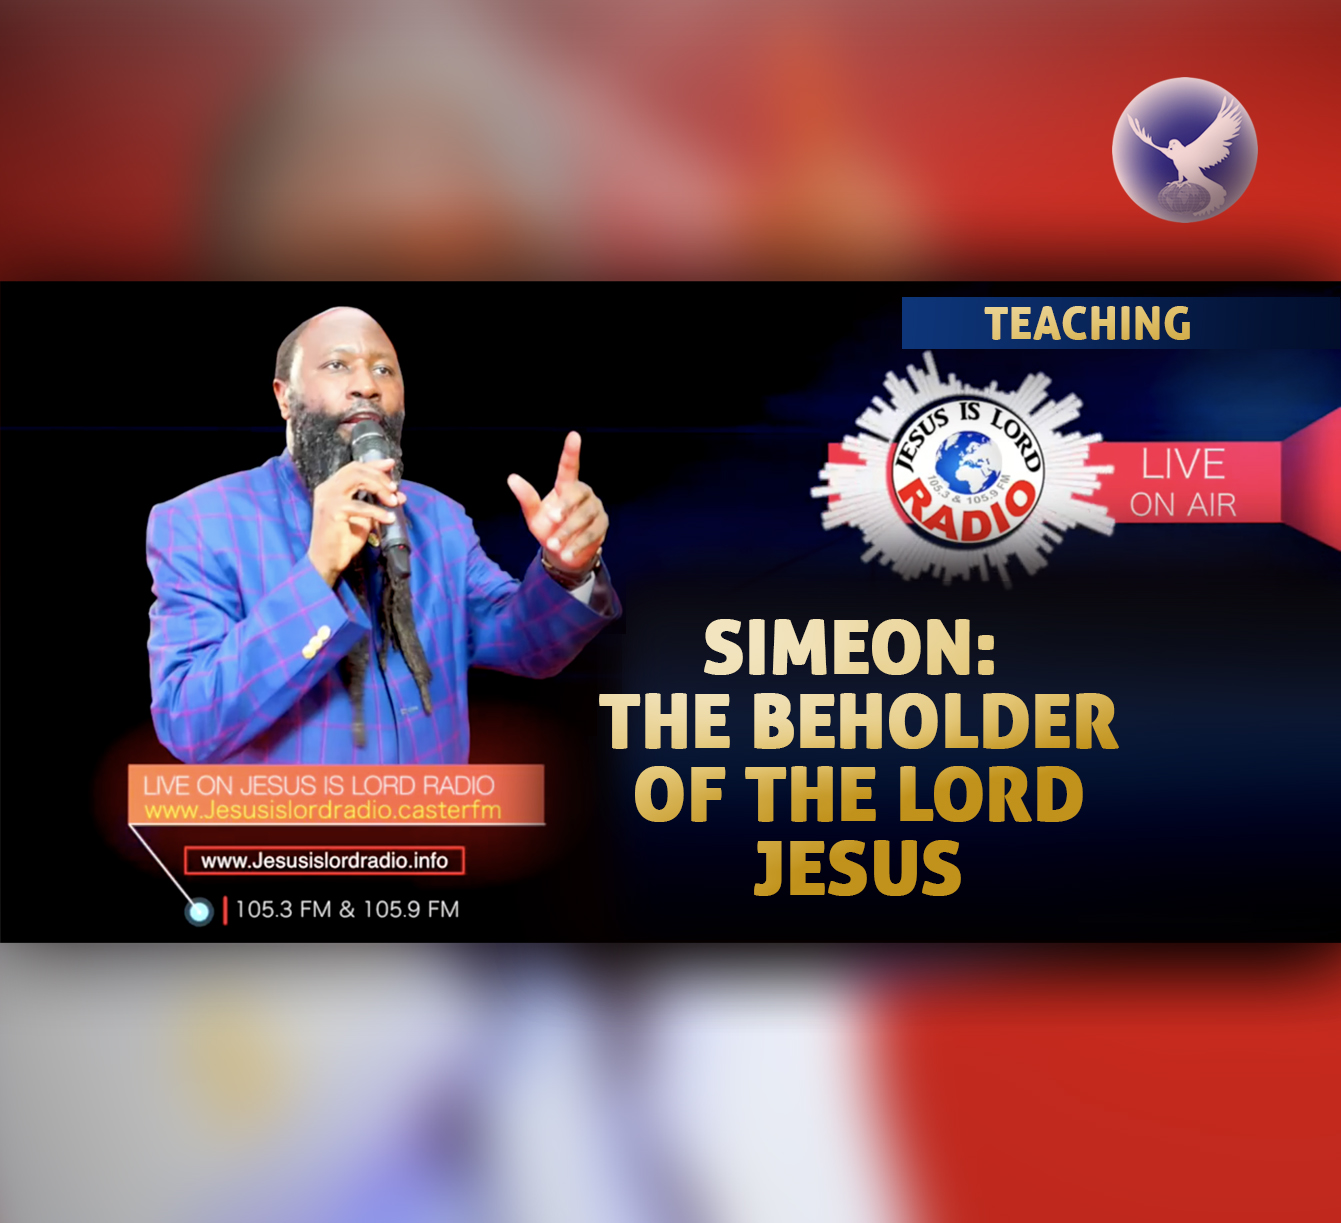 EPISODE 204 - SIMEON: THE BEHOLDER OF THE LORD JESUS - PROPHET DR. OWUOR